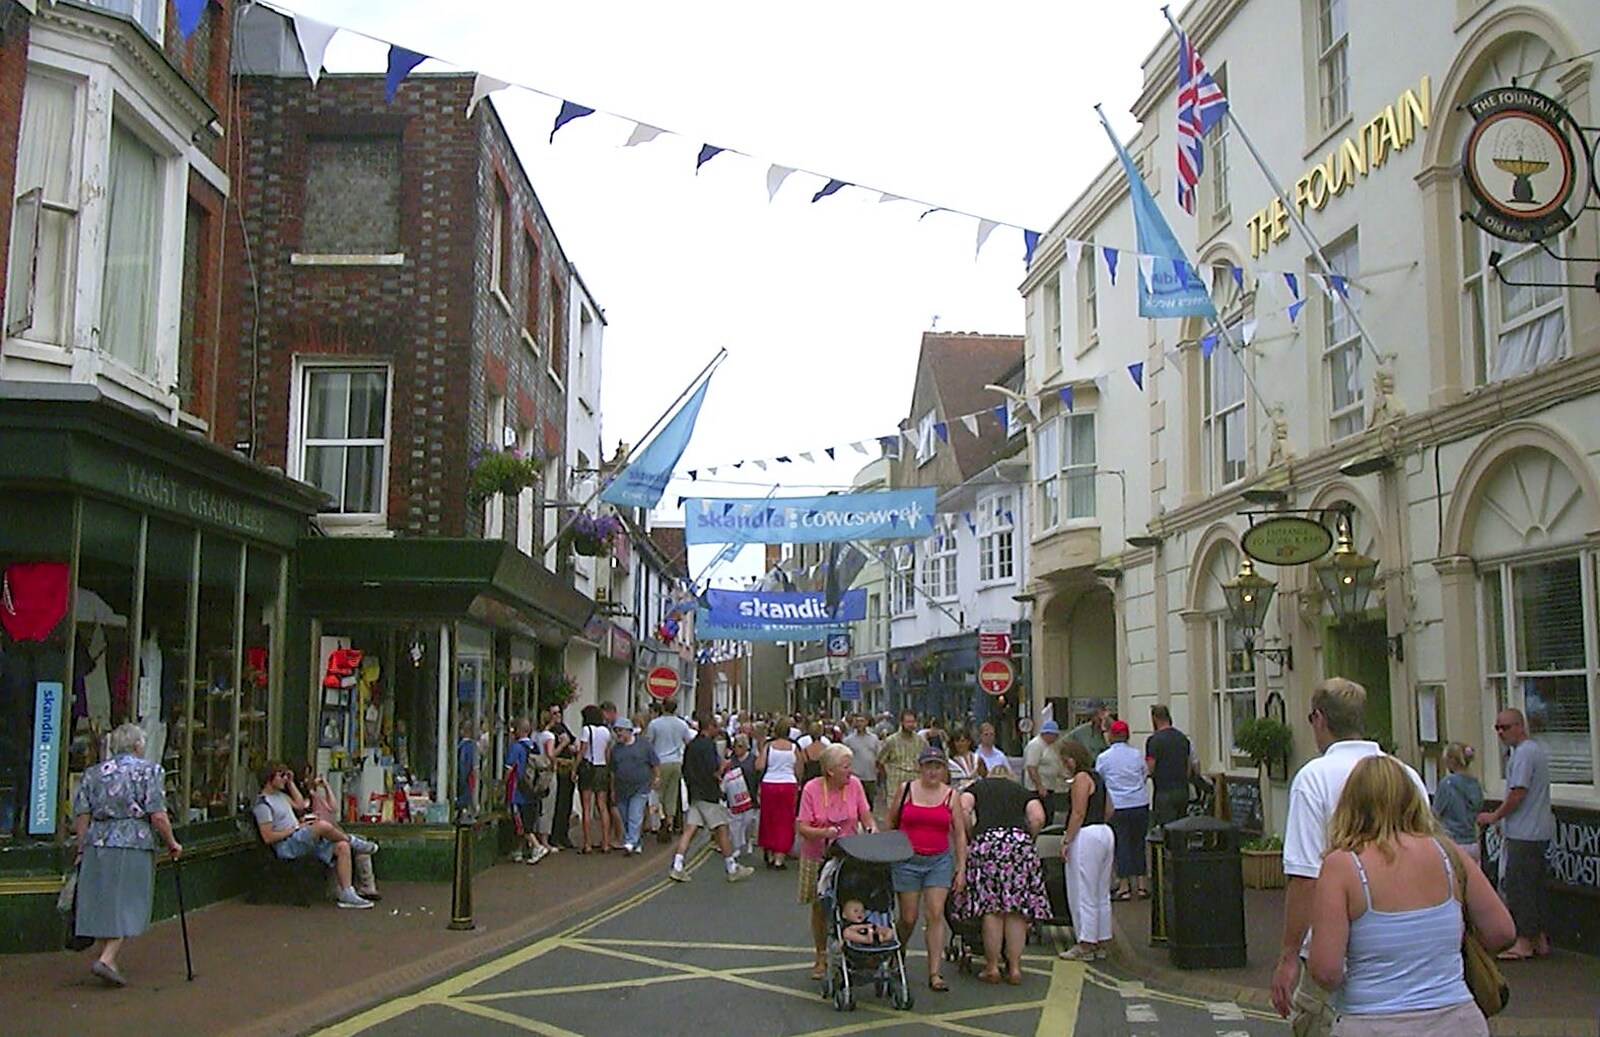 The Fountain, on High Street from Cowes Weekend, Cowes, Isle of Wight - 7th August 2004